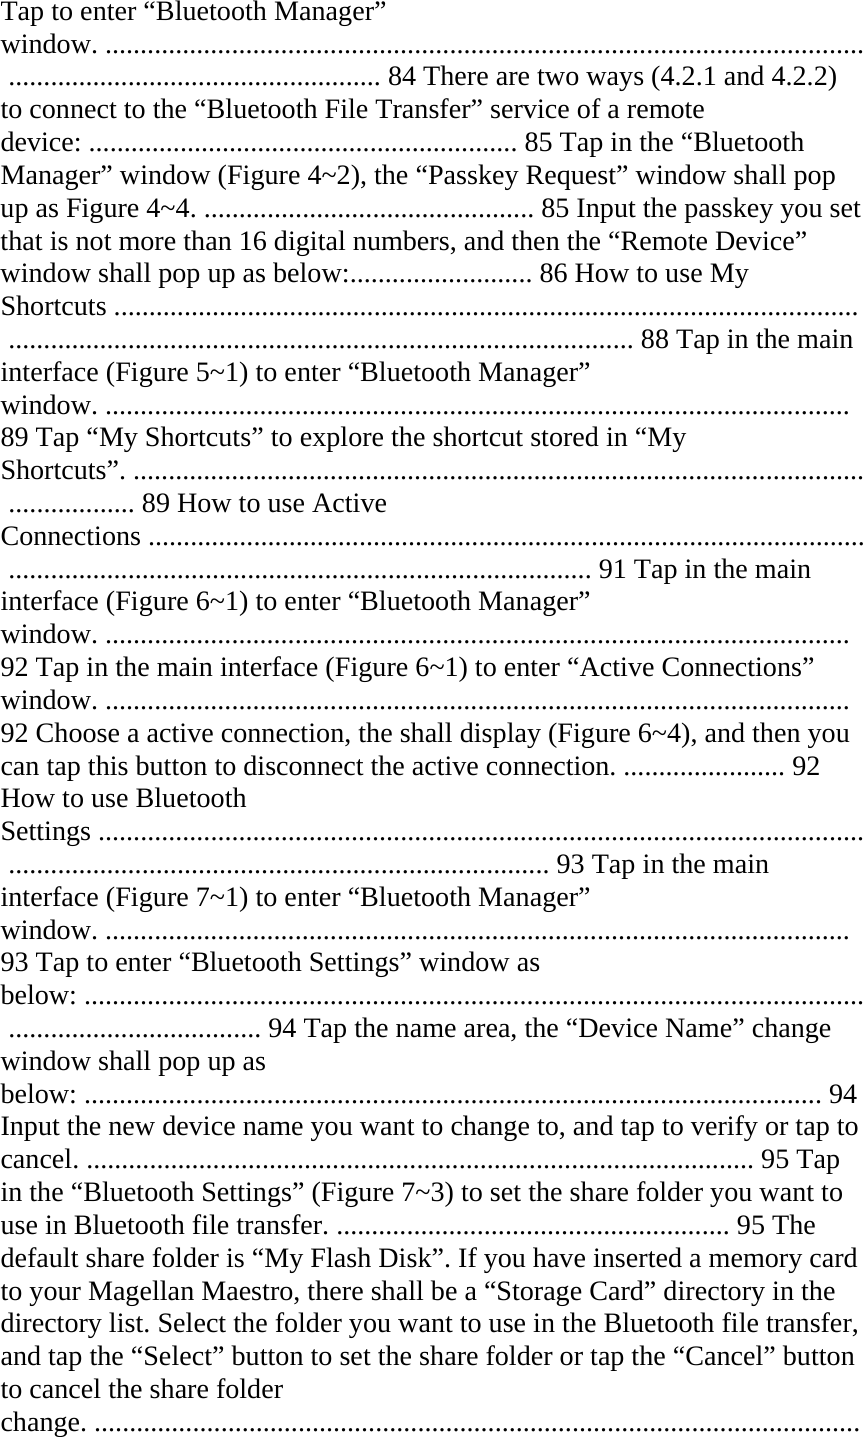 Tap to enter “Bluetooth Manager” window. ............................................................................................................ ..................................................... 84 There are two ways (4.2.1 and 4.2.2) to connect to the “Bluetooth File Transfer” service of a remote device: ............................................................. 85 Tap in the “Bluetooth Manager” window (Figure 4~2), the “Passkey Request” window shall pop up as Figure 4~4. ............................................... 85 Input the passkey you set that is not more than 16 digital numbers, and then the “Remote Device” window shall pop up as below:.......................... 86 How to use My Shortcuts ..........................................................................................................  ......................................................................................... 88 Tap in the main interface (Figure 5~1) to enter “Bluetooth Manager” window. .......................................................................................................... 89 Tap “My Shortcuts” to explore the shortcut stored in “My Shortcuts”. ........................................................................................................ .................. 89 How to use Active  Connections ...................................................................................................... ................................................................................... 91 Tap in the main interface (Figure 6~1) to enter “Bluetooth Manager” window. .......................................................................................................... 92 Tap in the main interface (Figure 6~1) to enter “Active Connections” window. .......................................................................................................... 92 Choose a active connection, the shall display (Figure 6~4), and then you can tap this button to disconnect the active connection. ....................... 92 How to use Bluetooth Settings ............................................................................................................. ............................................................................. 93 Tap in the main interface (Figure 7~1) to enter “Bluetooth Manager” window. .......................................................................................................... 93 Tap to enter “Bluetooth Settings” window as below: ............................................................................................................... .................................... 94 Tap the name area, the “Device Name” change window shall pop up as below: ......................................................................................................... 94 Input the new device name you want to change to, and tap to verify or tap to cancel. ............................................................................................... 95 Tap in the “Bluetooth Settings” (Figure 7~3) to set the share folder you want to use in Bluetooth file transfer. ........................................................ 95 The default share folder is “My Flash Disk”. If you have inserted a memory card to your Magellan Maestro, there shall be a “Storage Card” directory in the directory list. Select the folder you want to use in the Bluetooth file transfer, and tap the “Select” button to set the share folder or tap the “Cancel” button to cancel the share folder change. ............................................................................................................. 